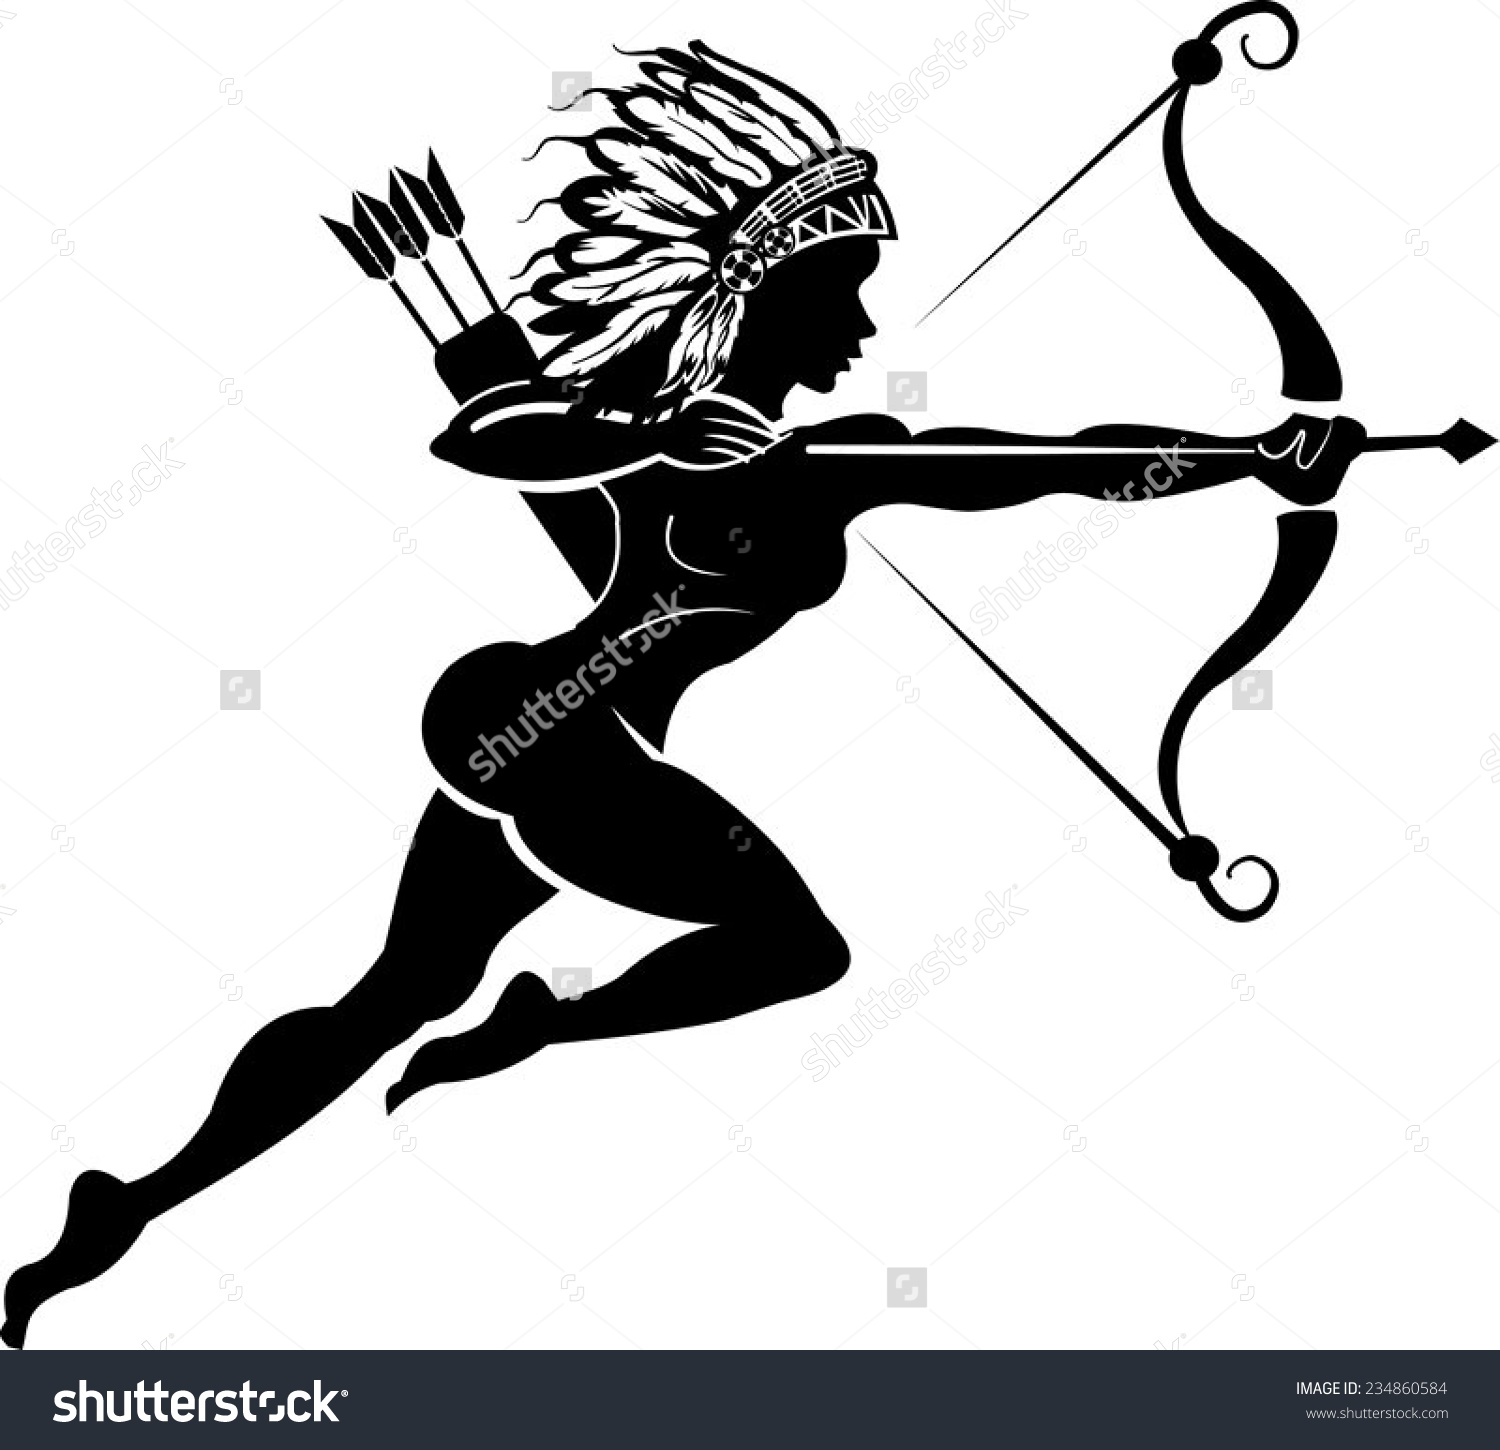 The best free Archery vector images. Download from 118 free vectors of ...